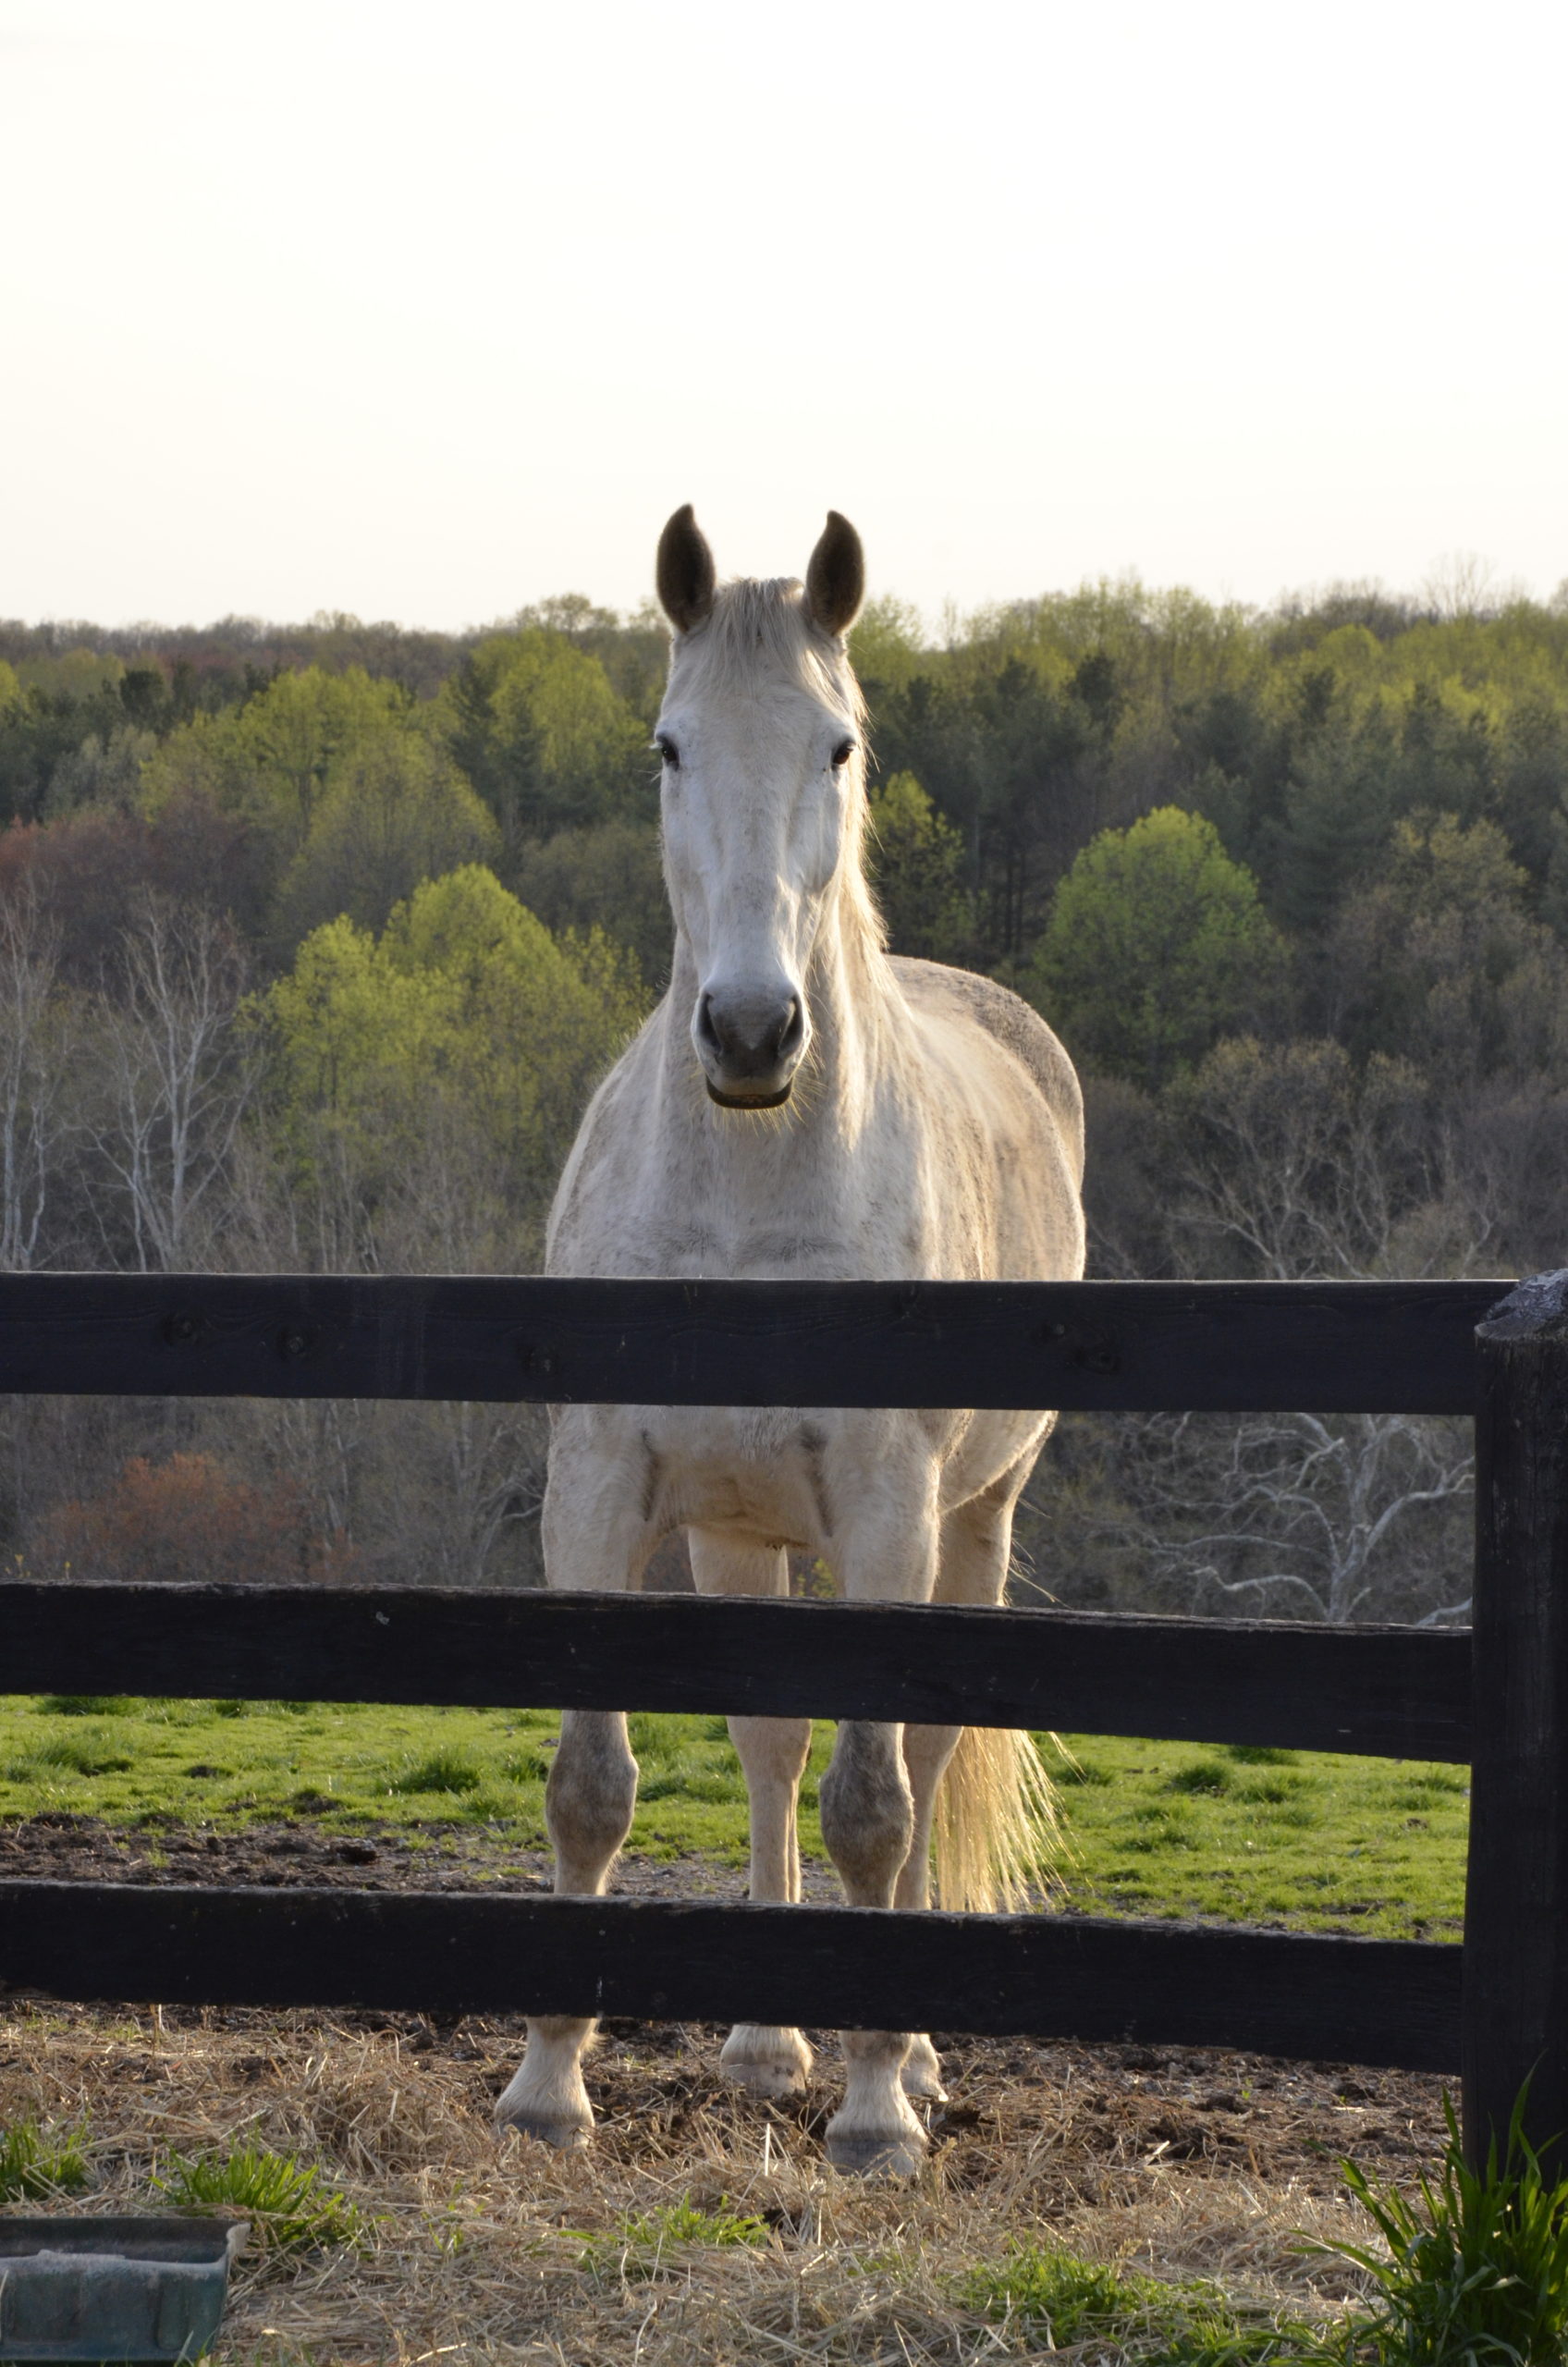 Managing the Changing Needs of Older Horses